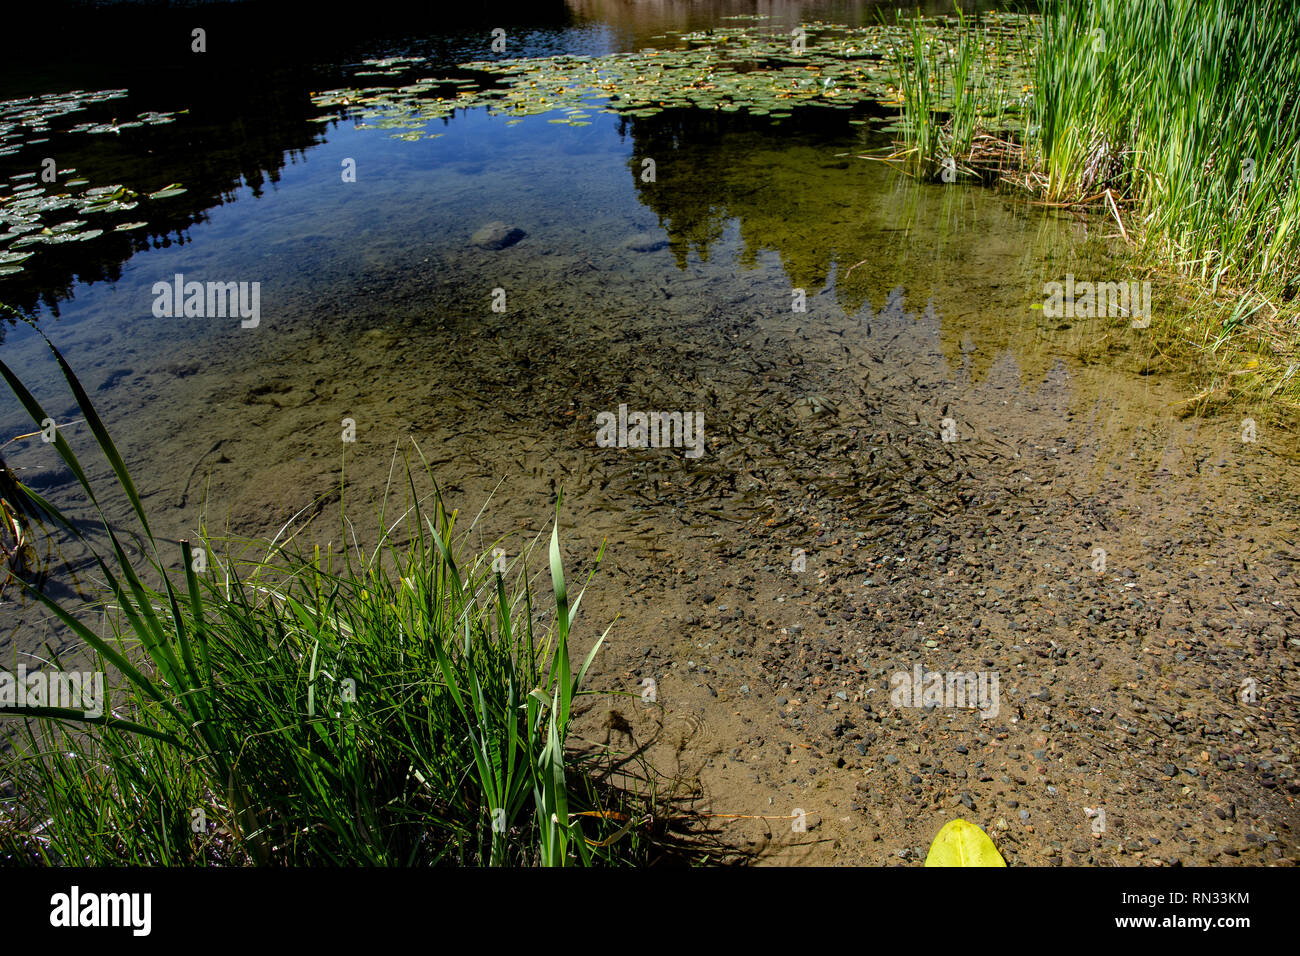 Many minnows in shallow water Stock Photo